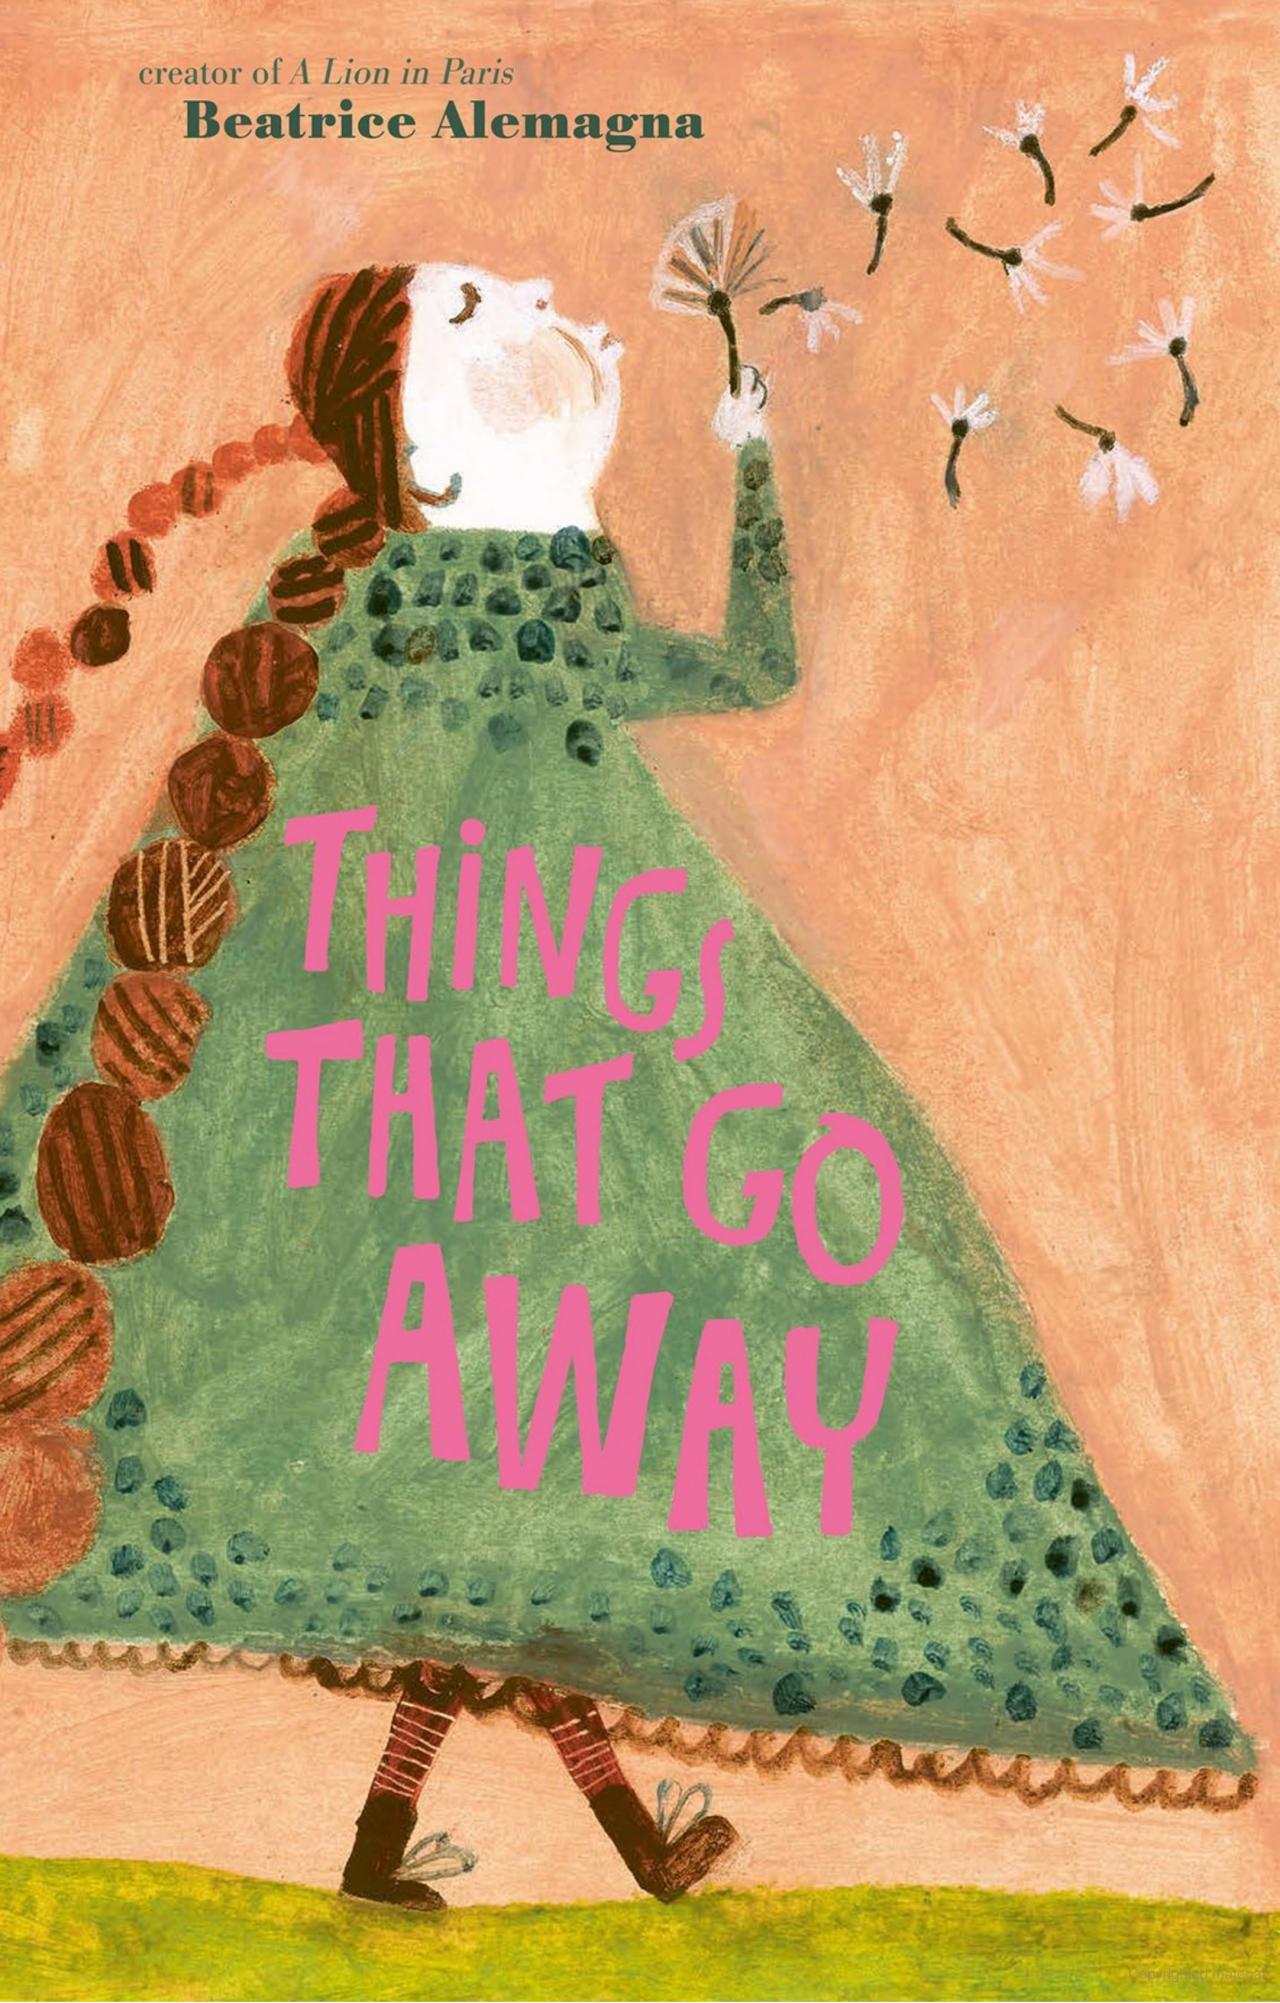 Cover of the picture book "Things That Go Away" by Beatrice Alemagna. A white person with long, braided brown hair in a green dress blows white dandelion seeds while walking.